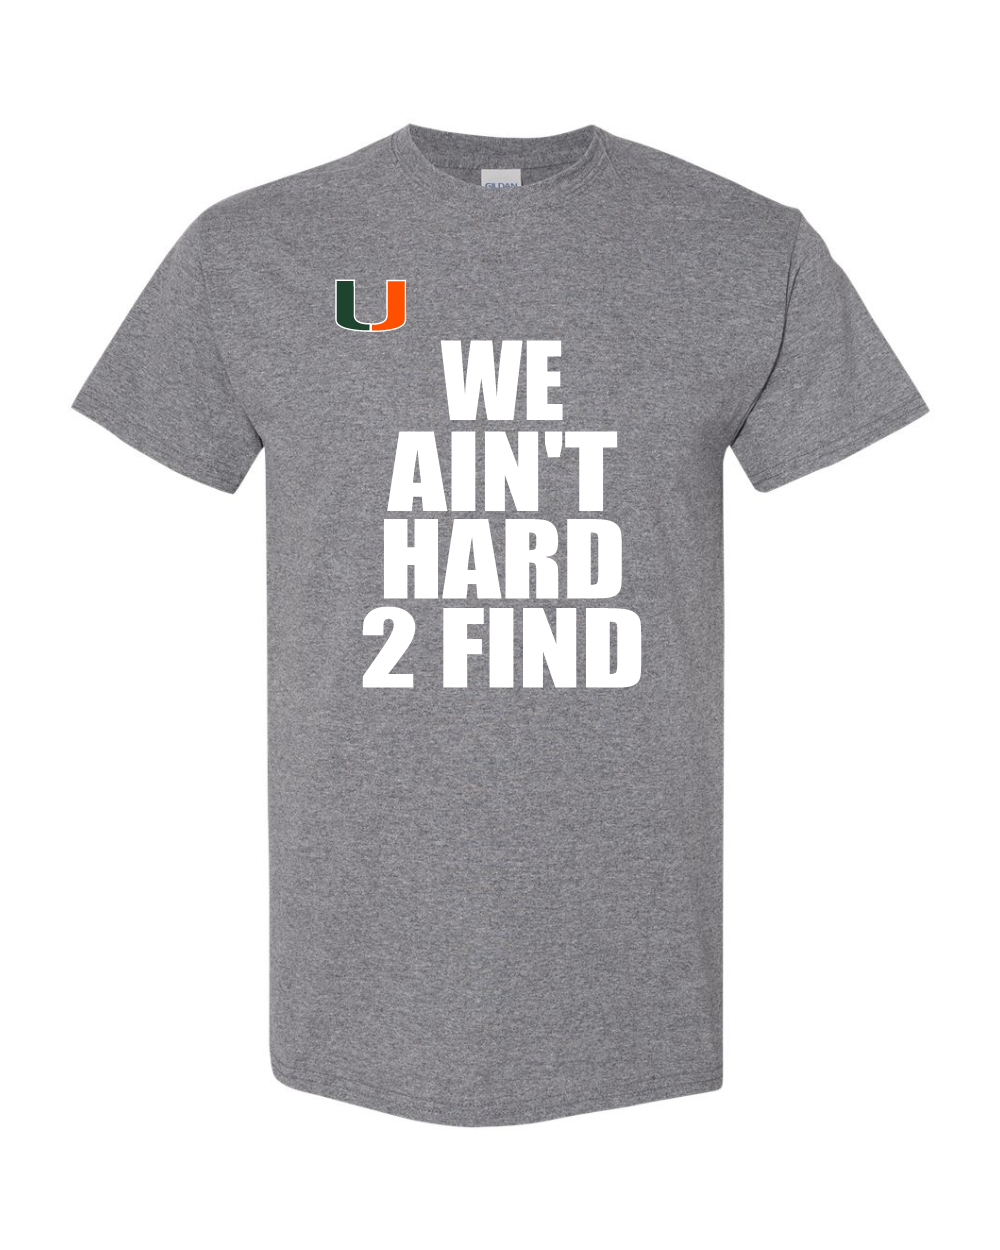 Pearland Canes- We Ain't Hard 2 Find- Grey SS Cotton Tee